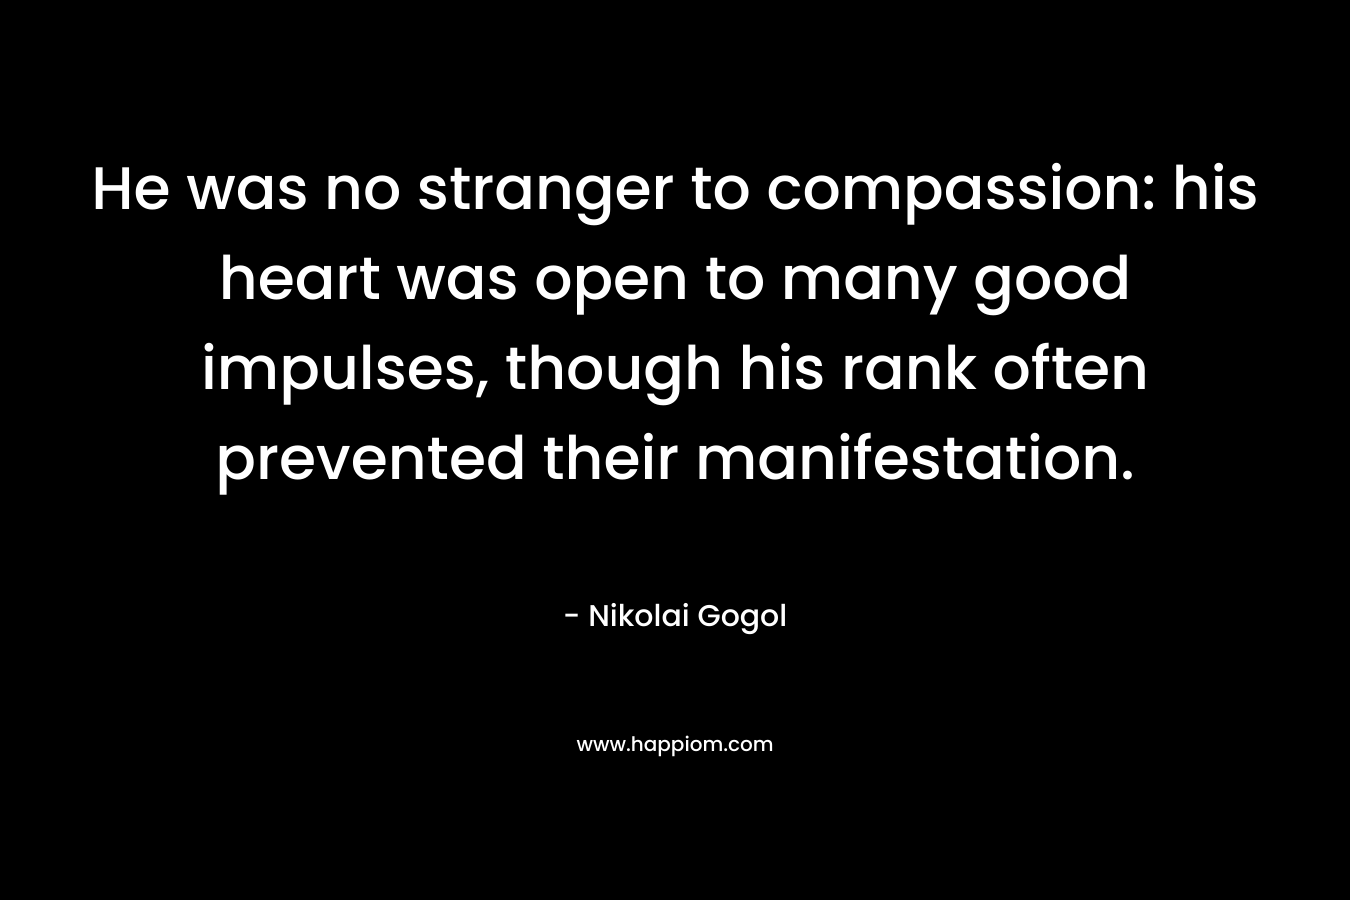 He was no stranger to compassion: his heart was open to many good impulses, though his rank often prevented their manifestation. – Nikolai Gogol